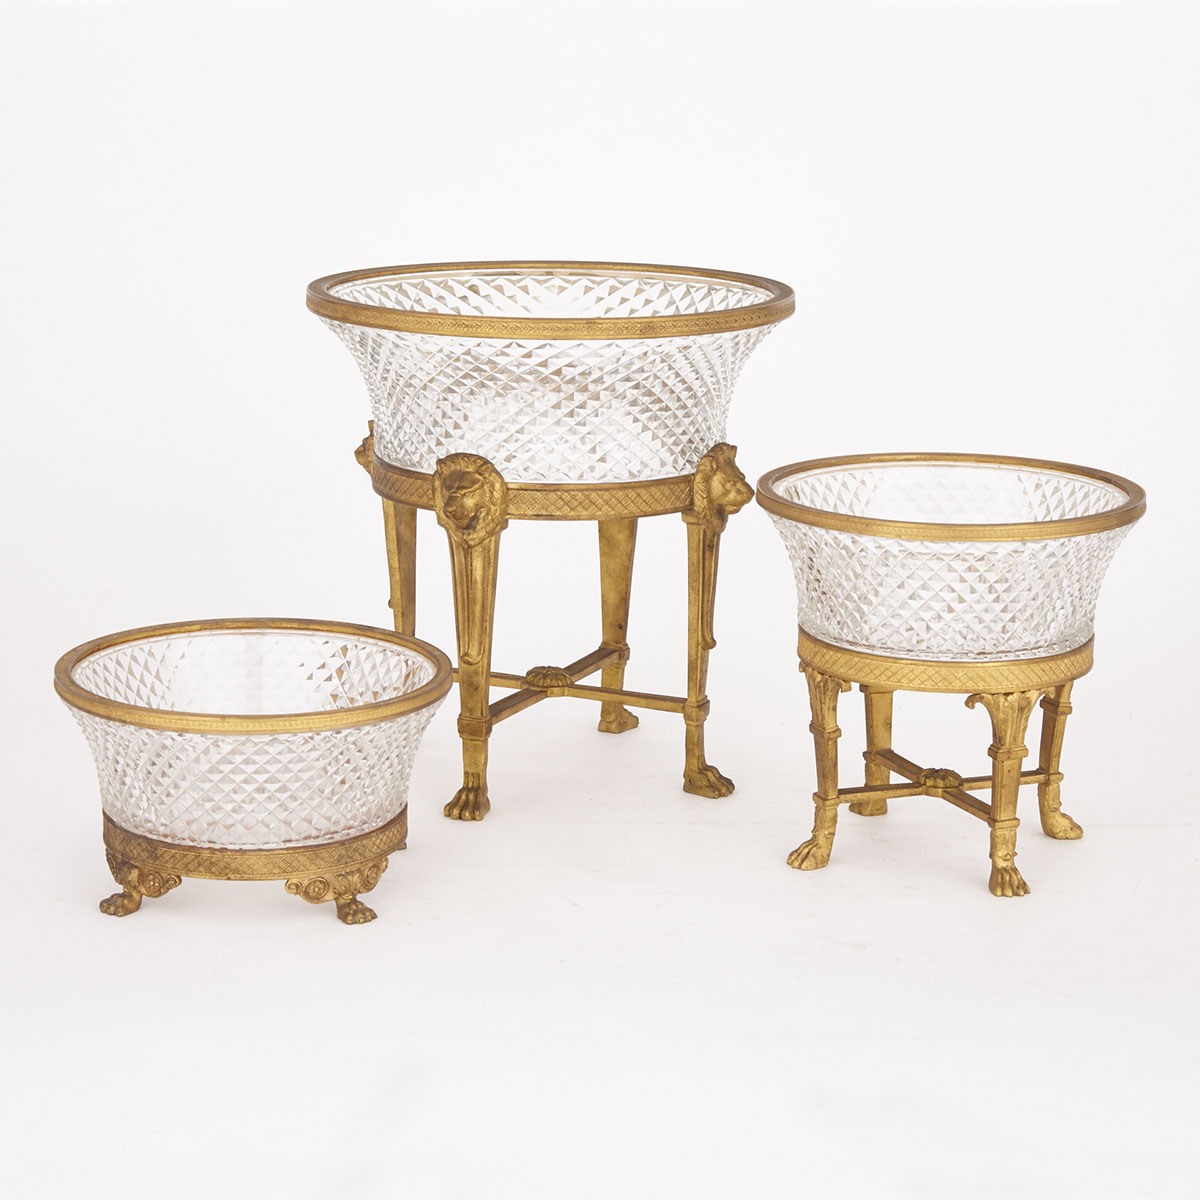 Graduated Set of Three Austrian Neoclassical Ormolu Mounted Cut Glass Bowls on Stands, early-mid 20th century